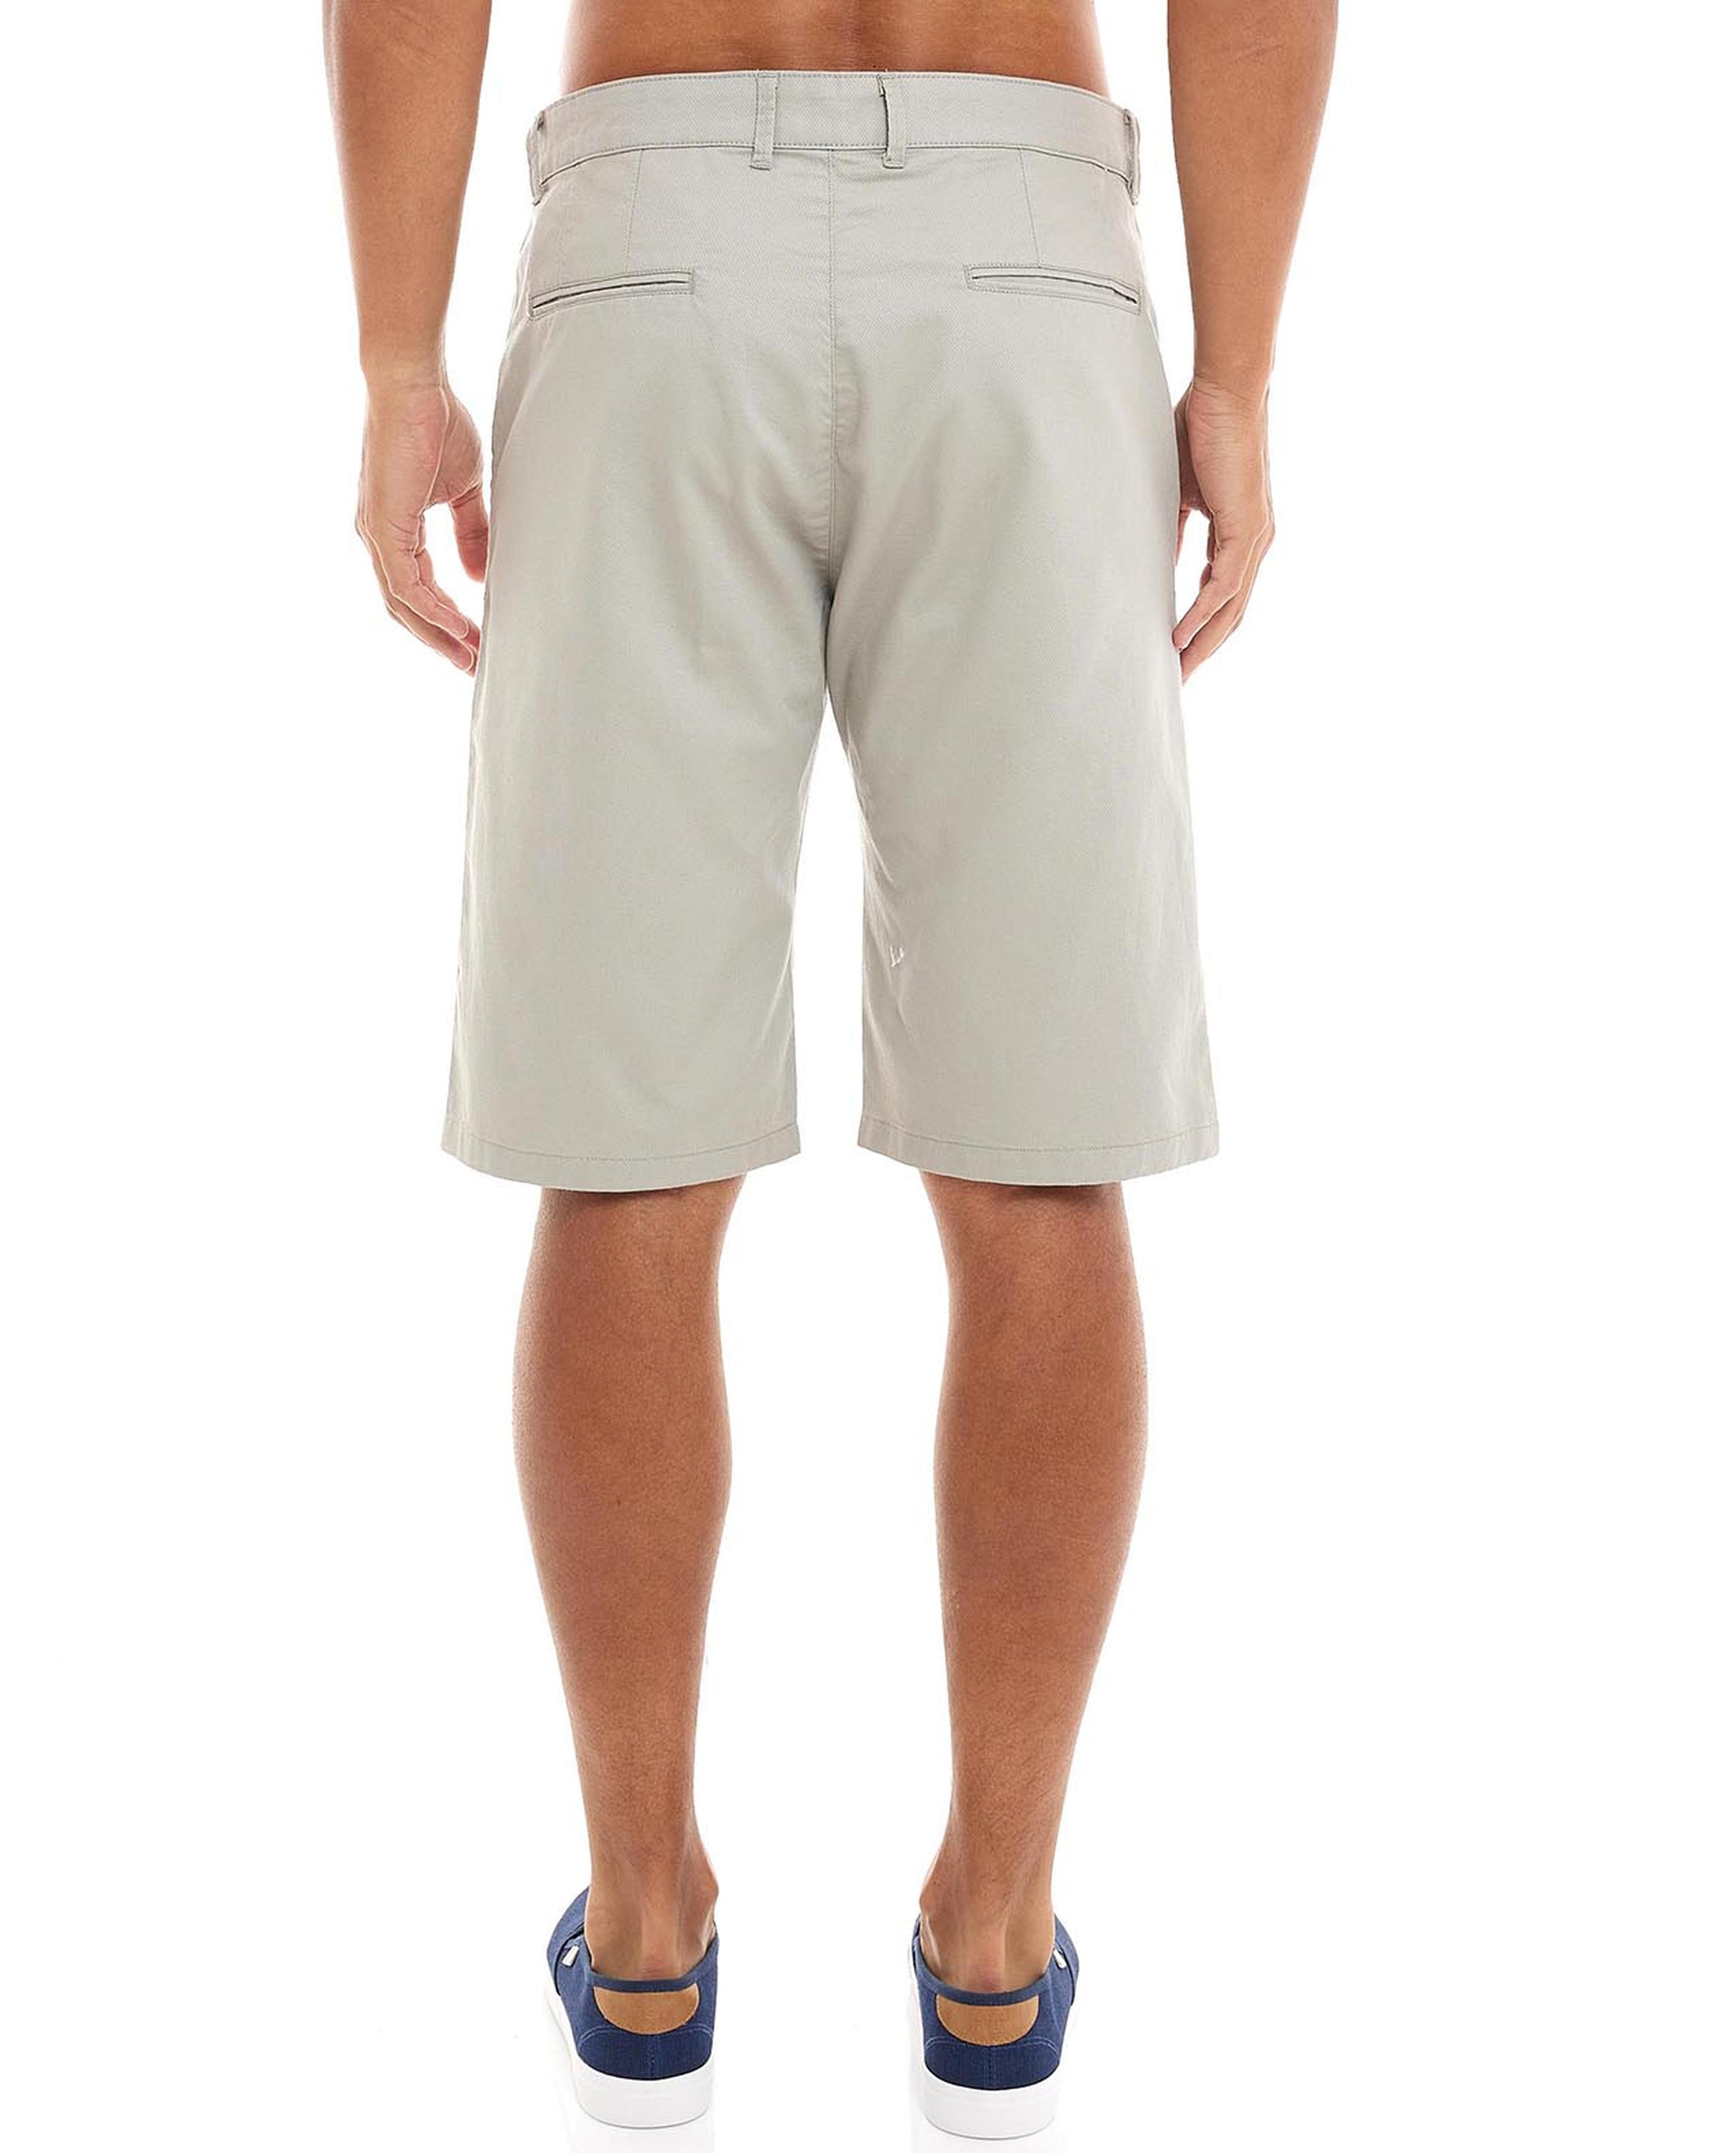 Solid Woven Shorts with Button Closure